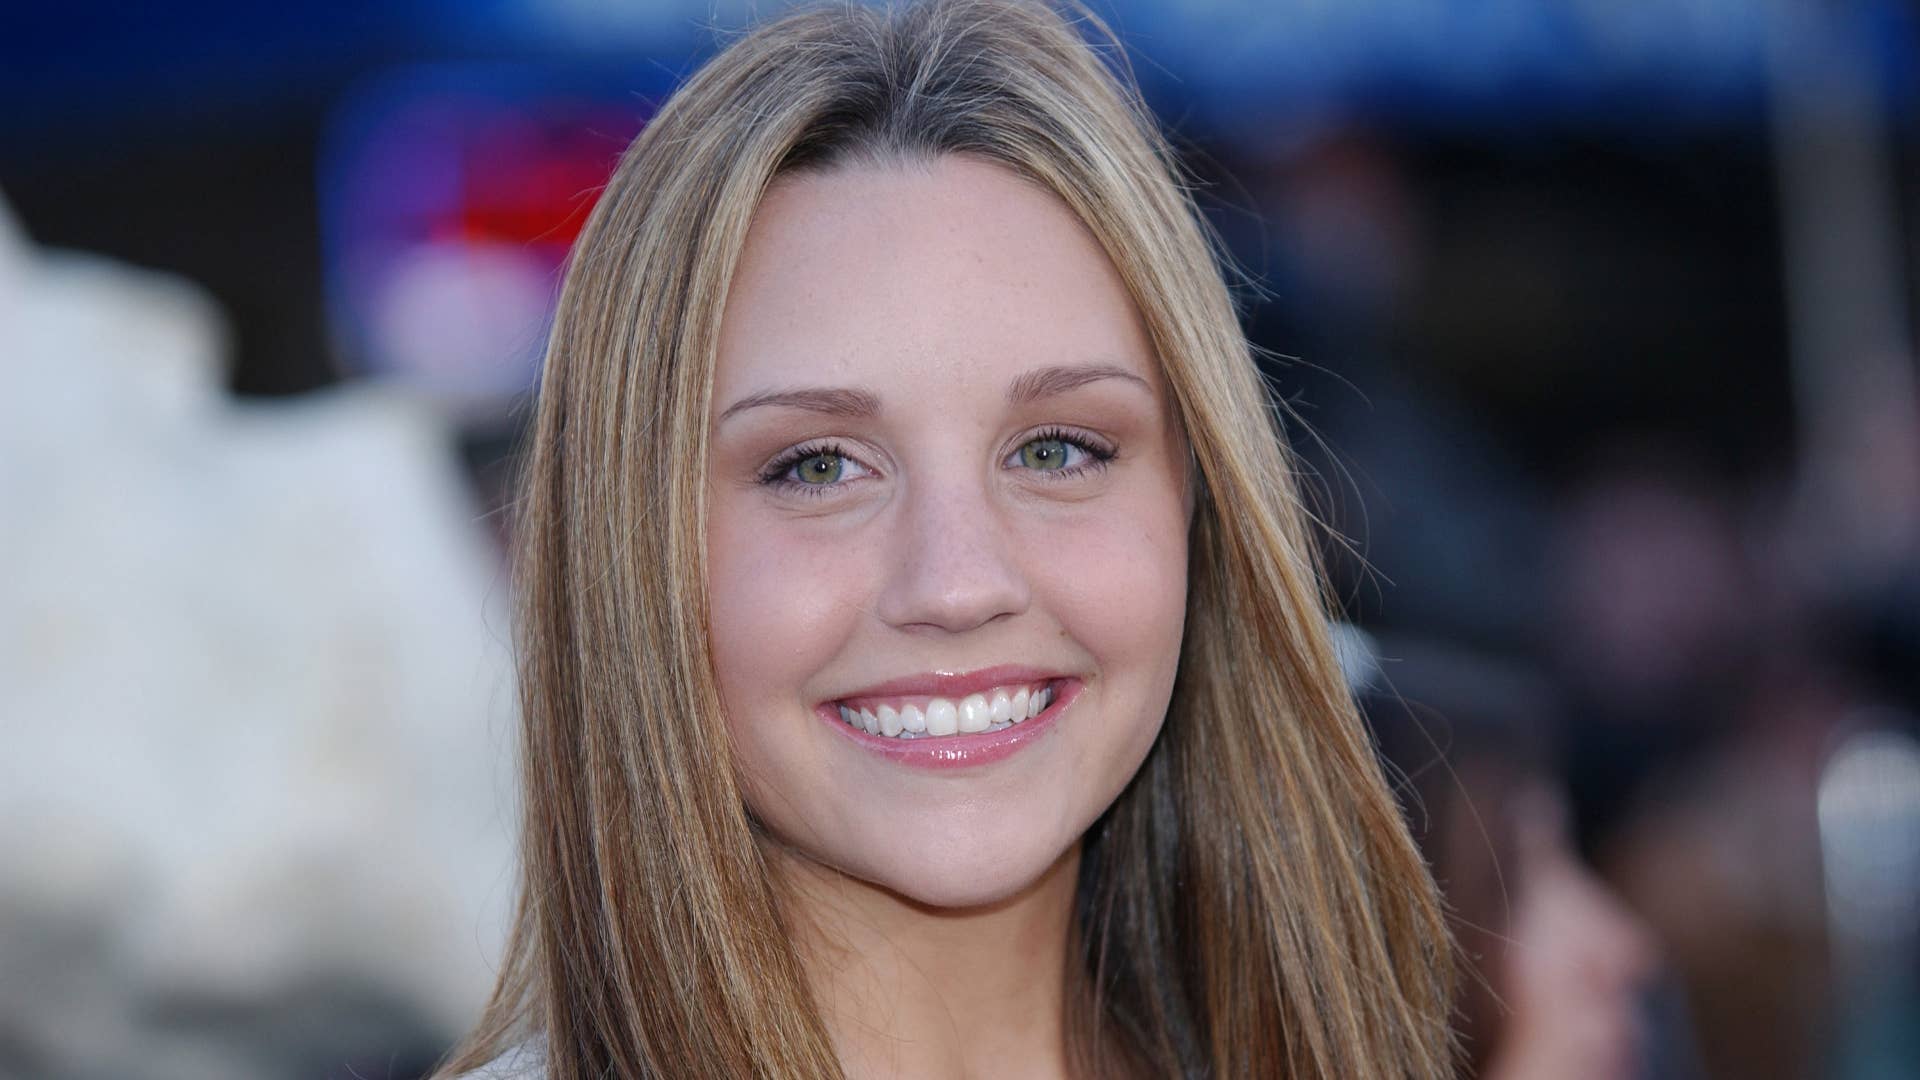 Amanda Bynes photographed while attending movie premiere.